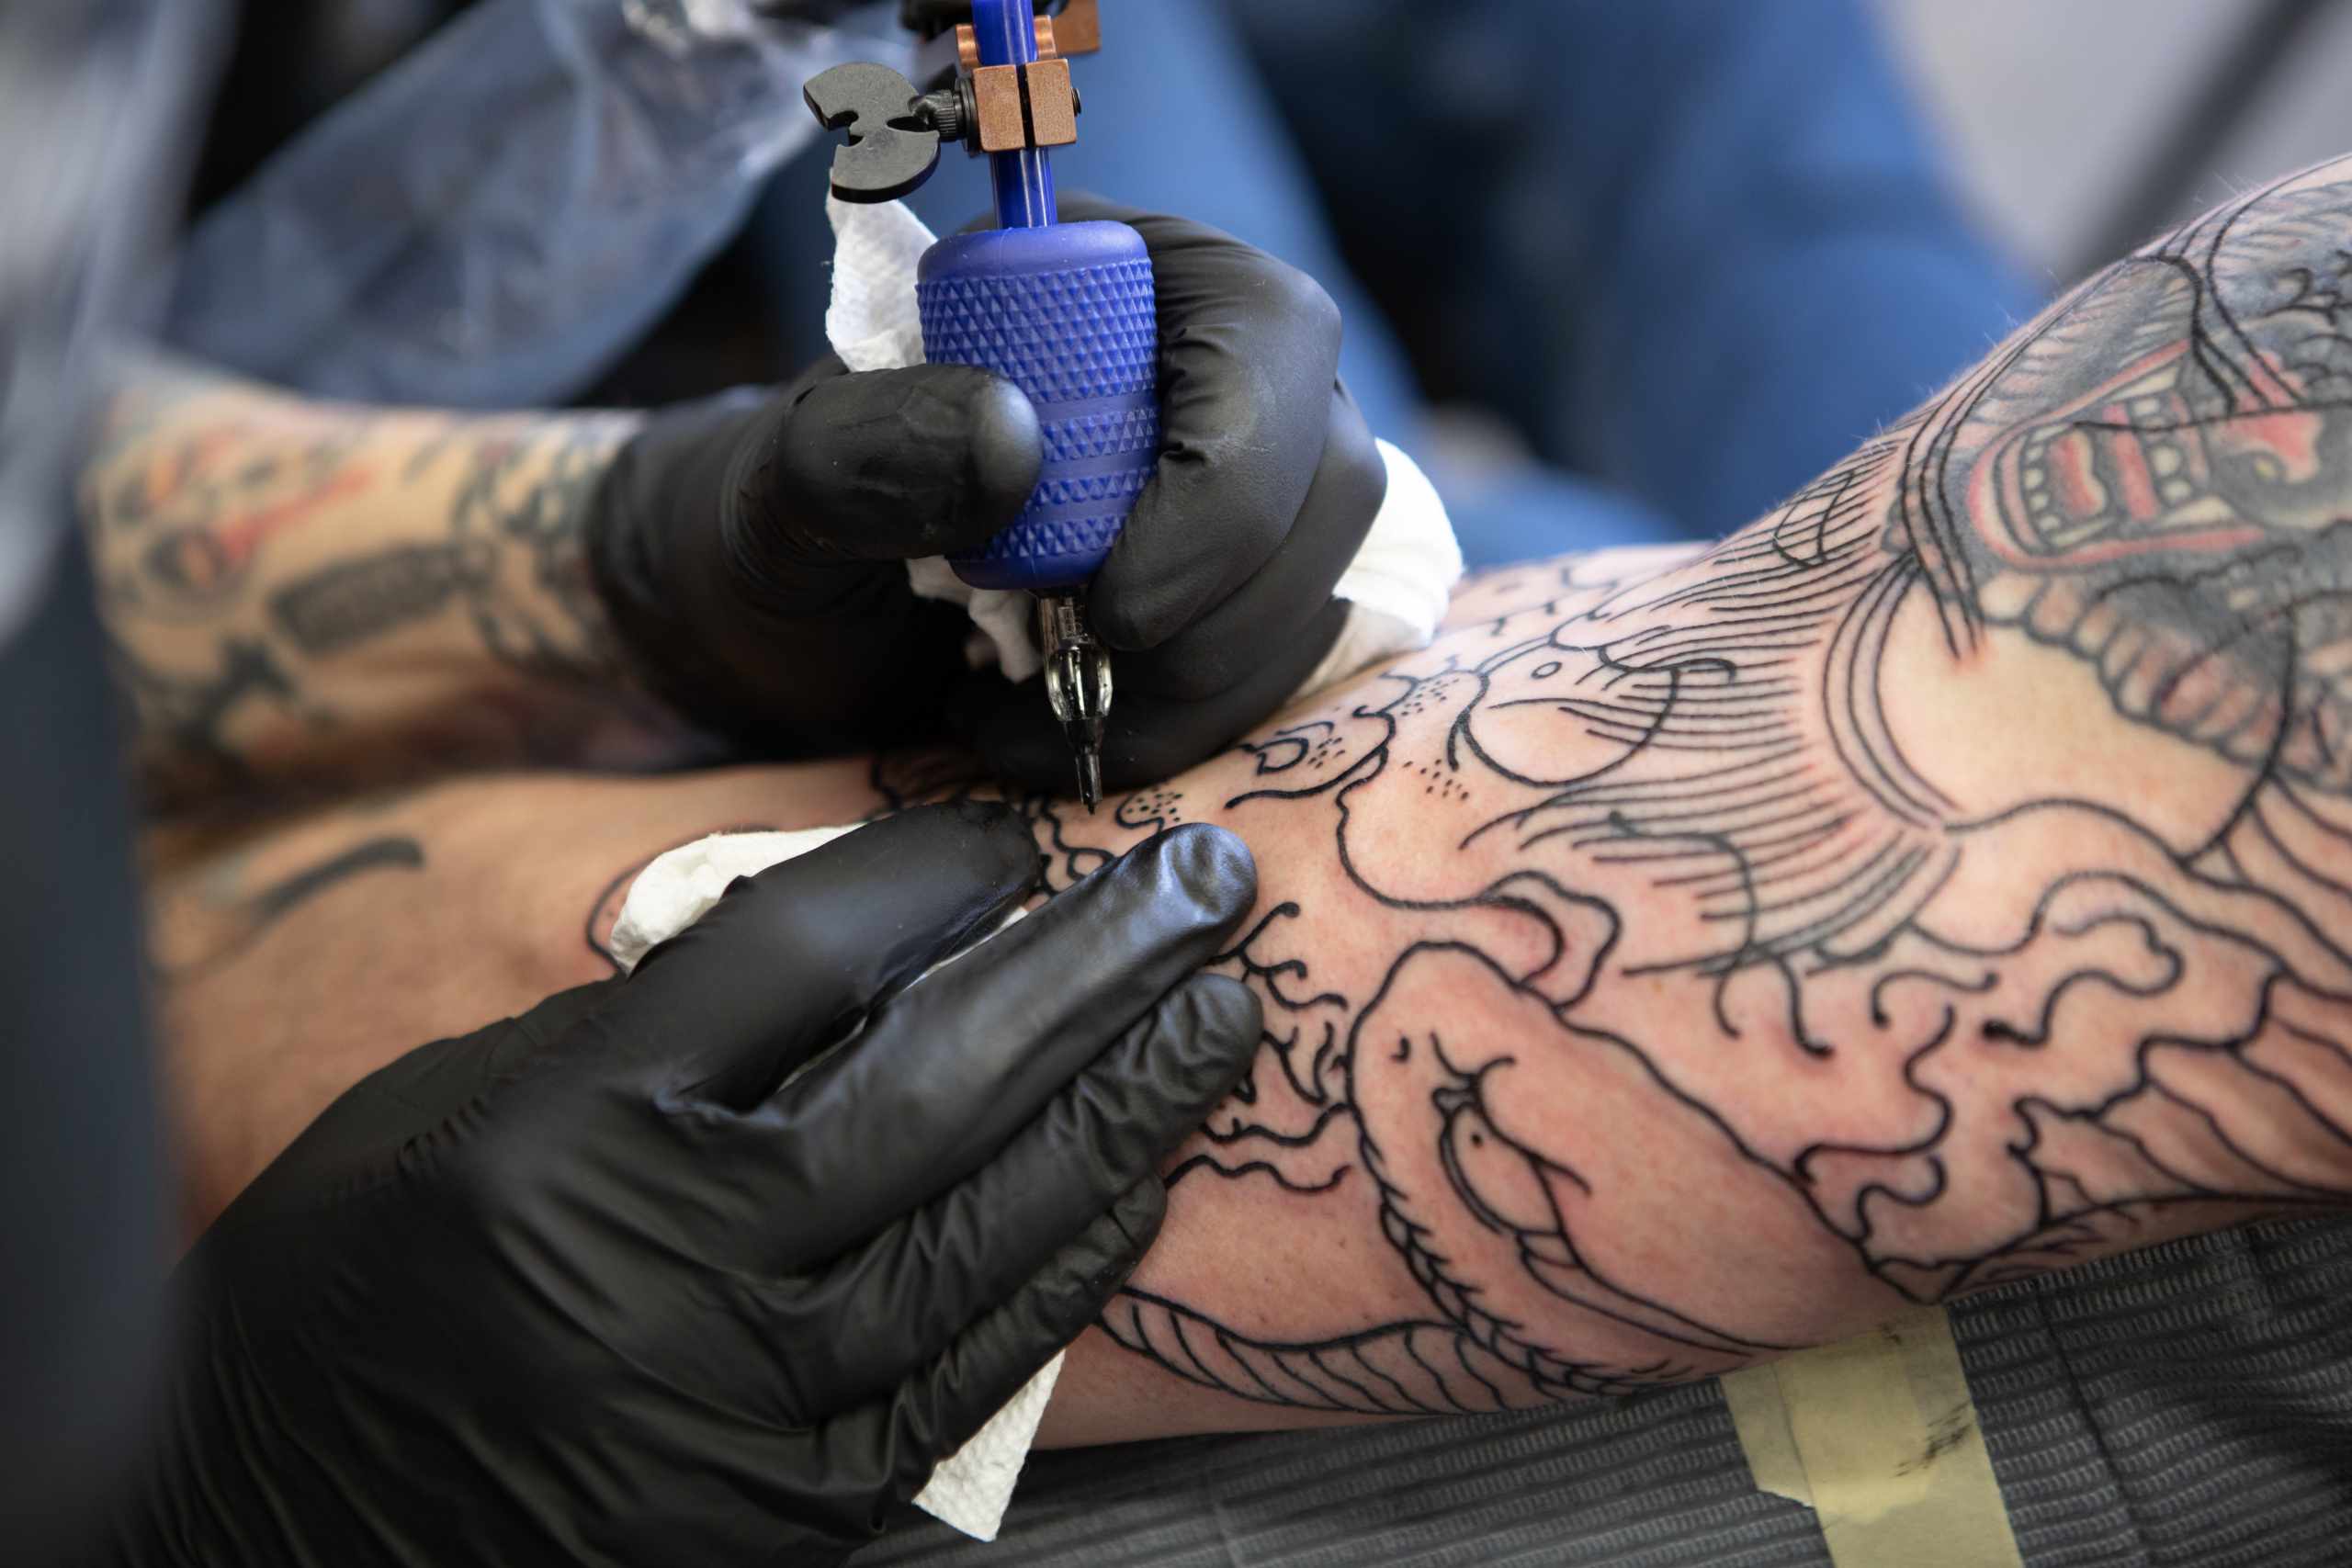 How much to tip a tattoo artist reddit